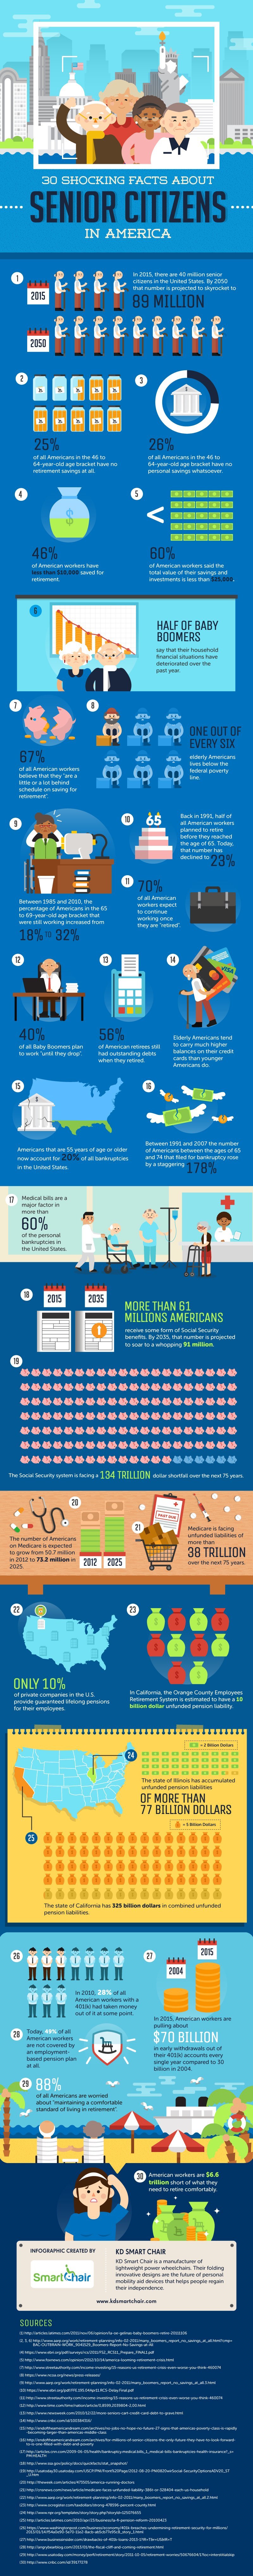 31 Shocking Facts about Senior Citizens in America infographic 1